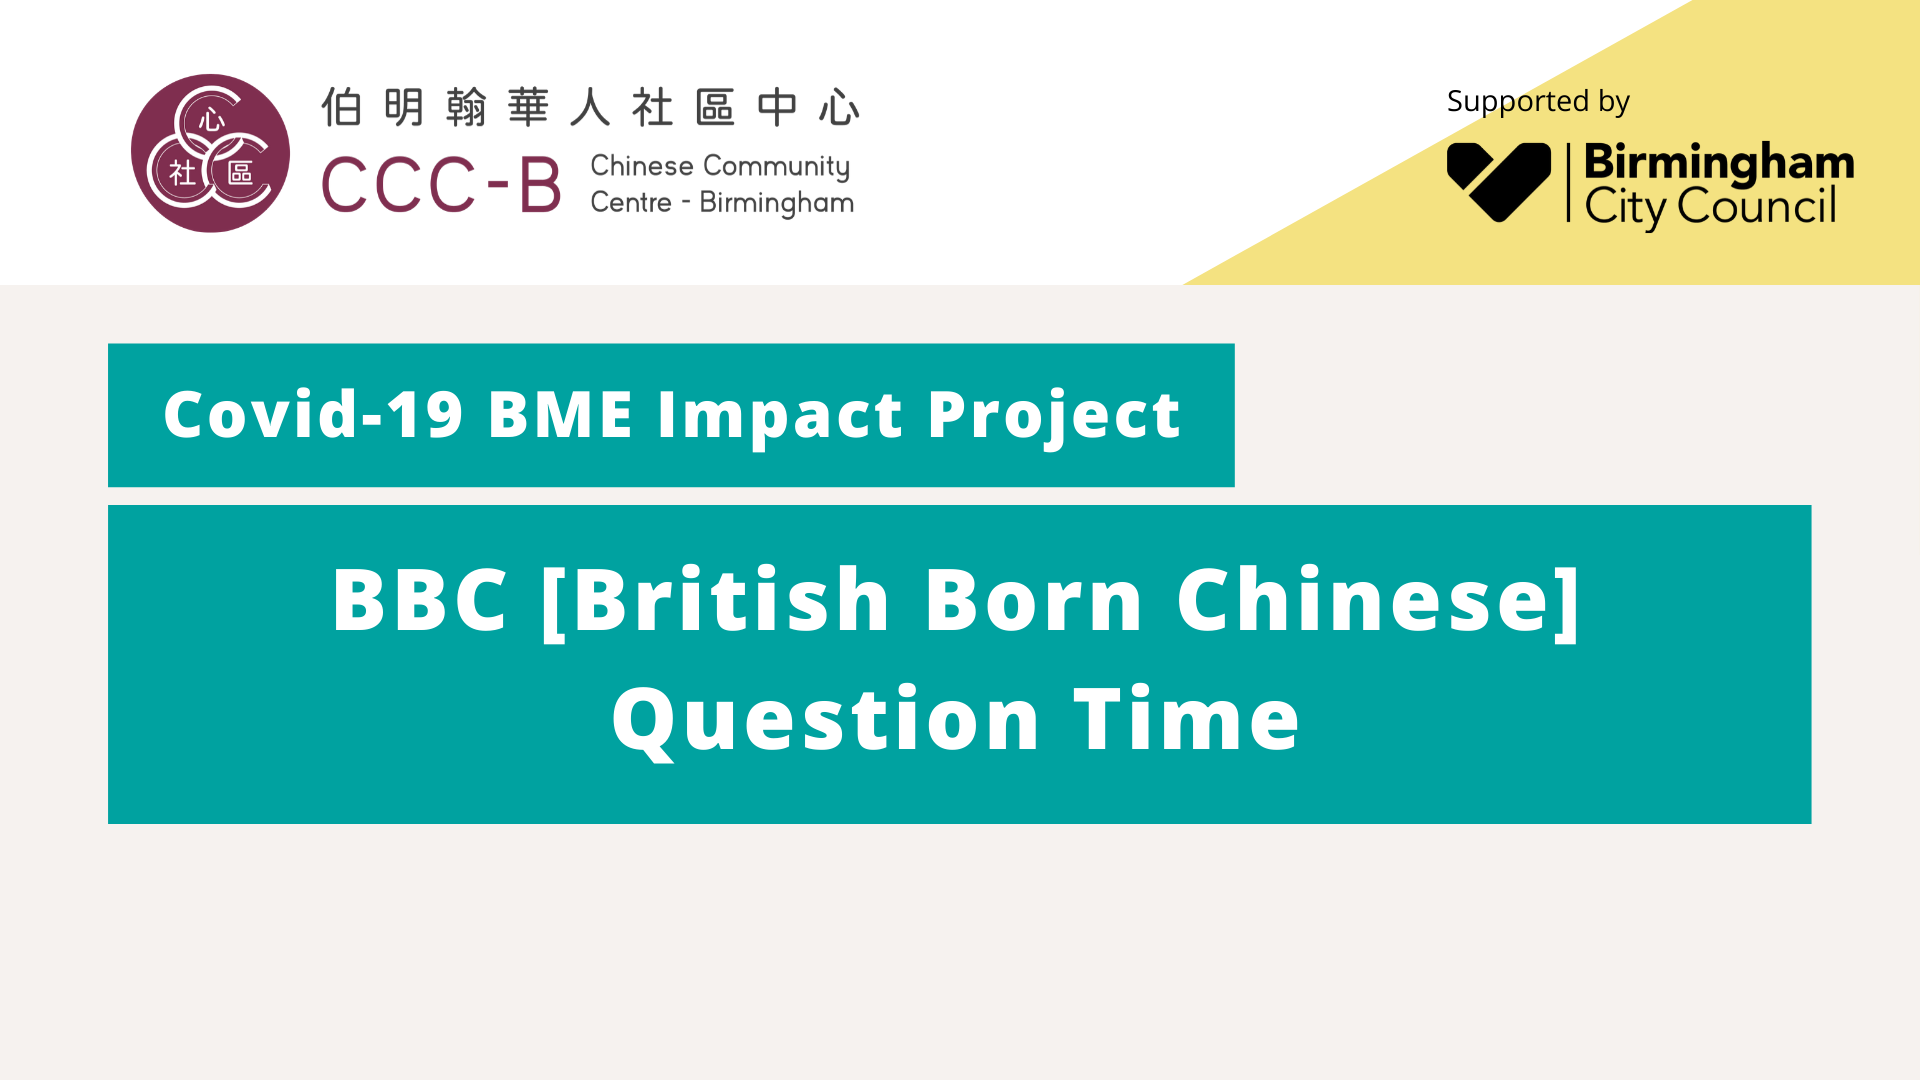 BBC [British Born Chinese] Question Time